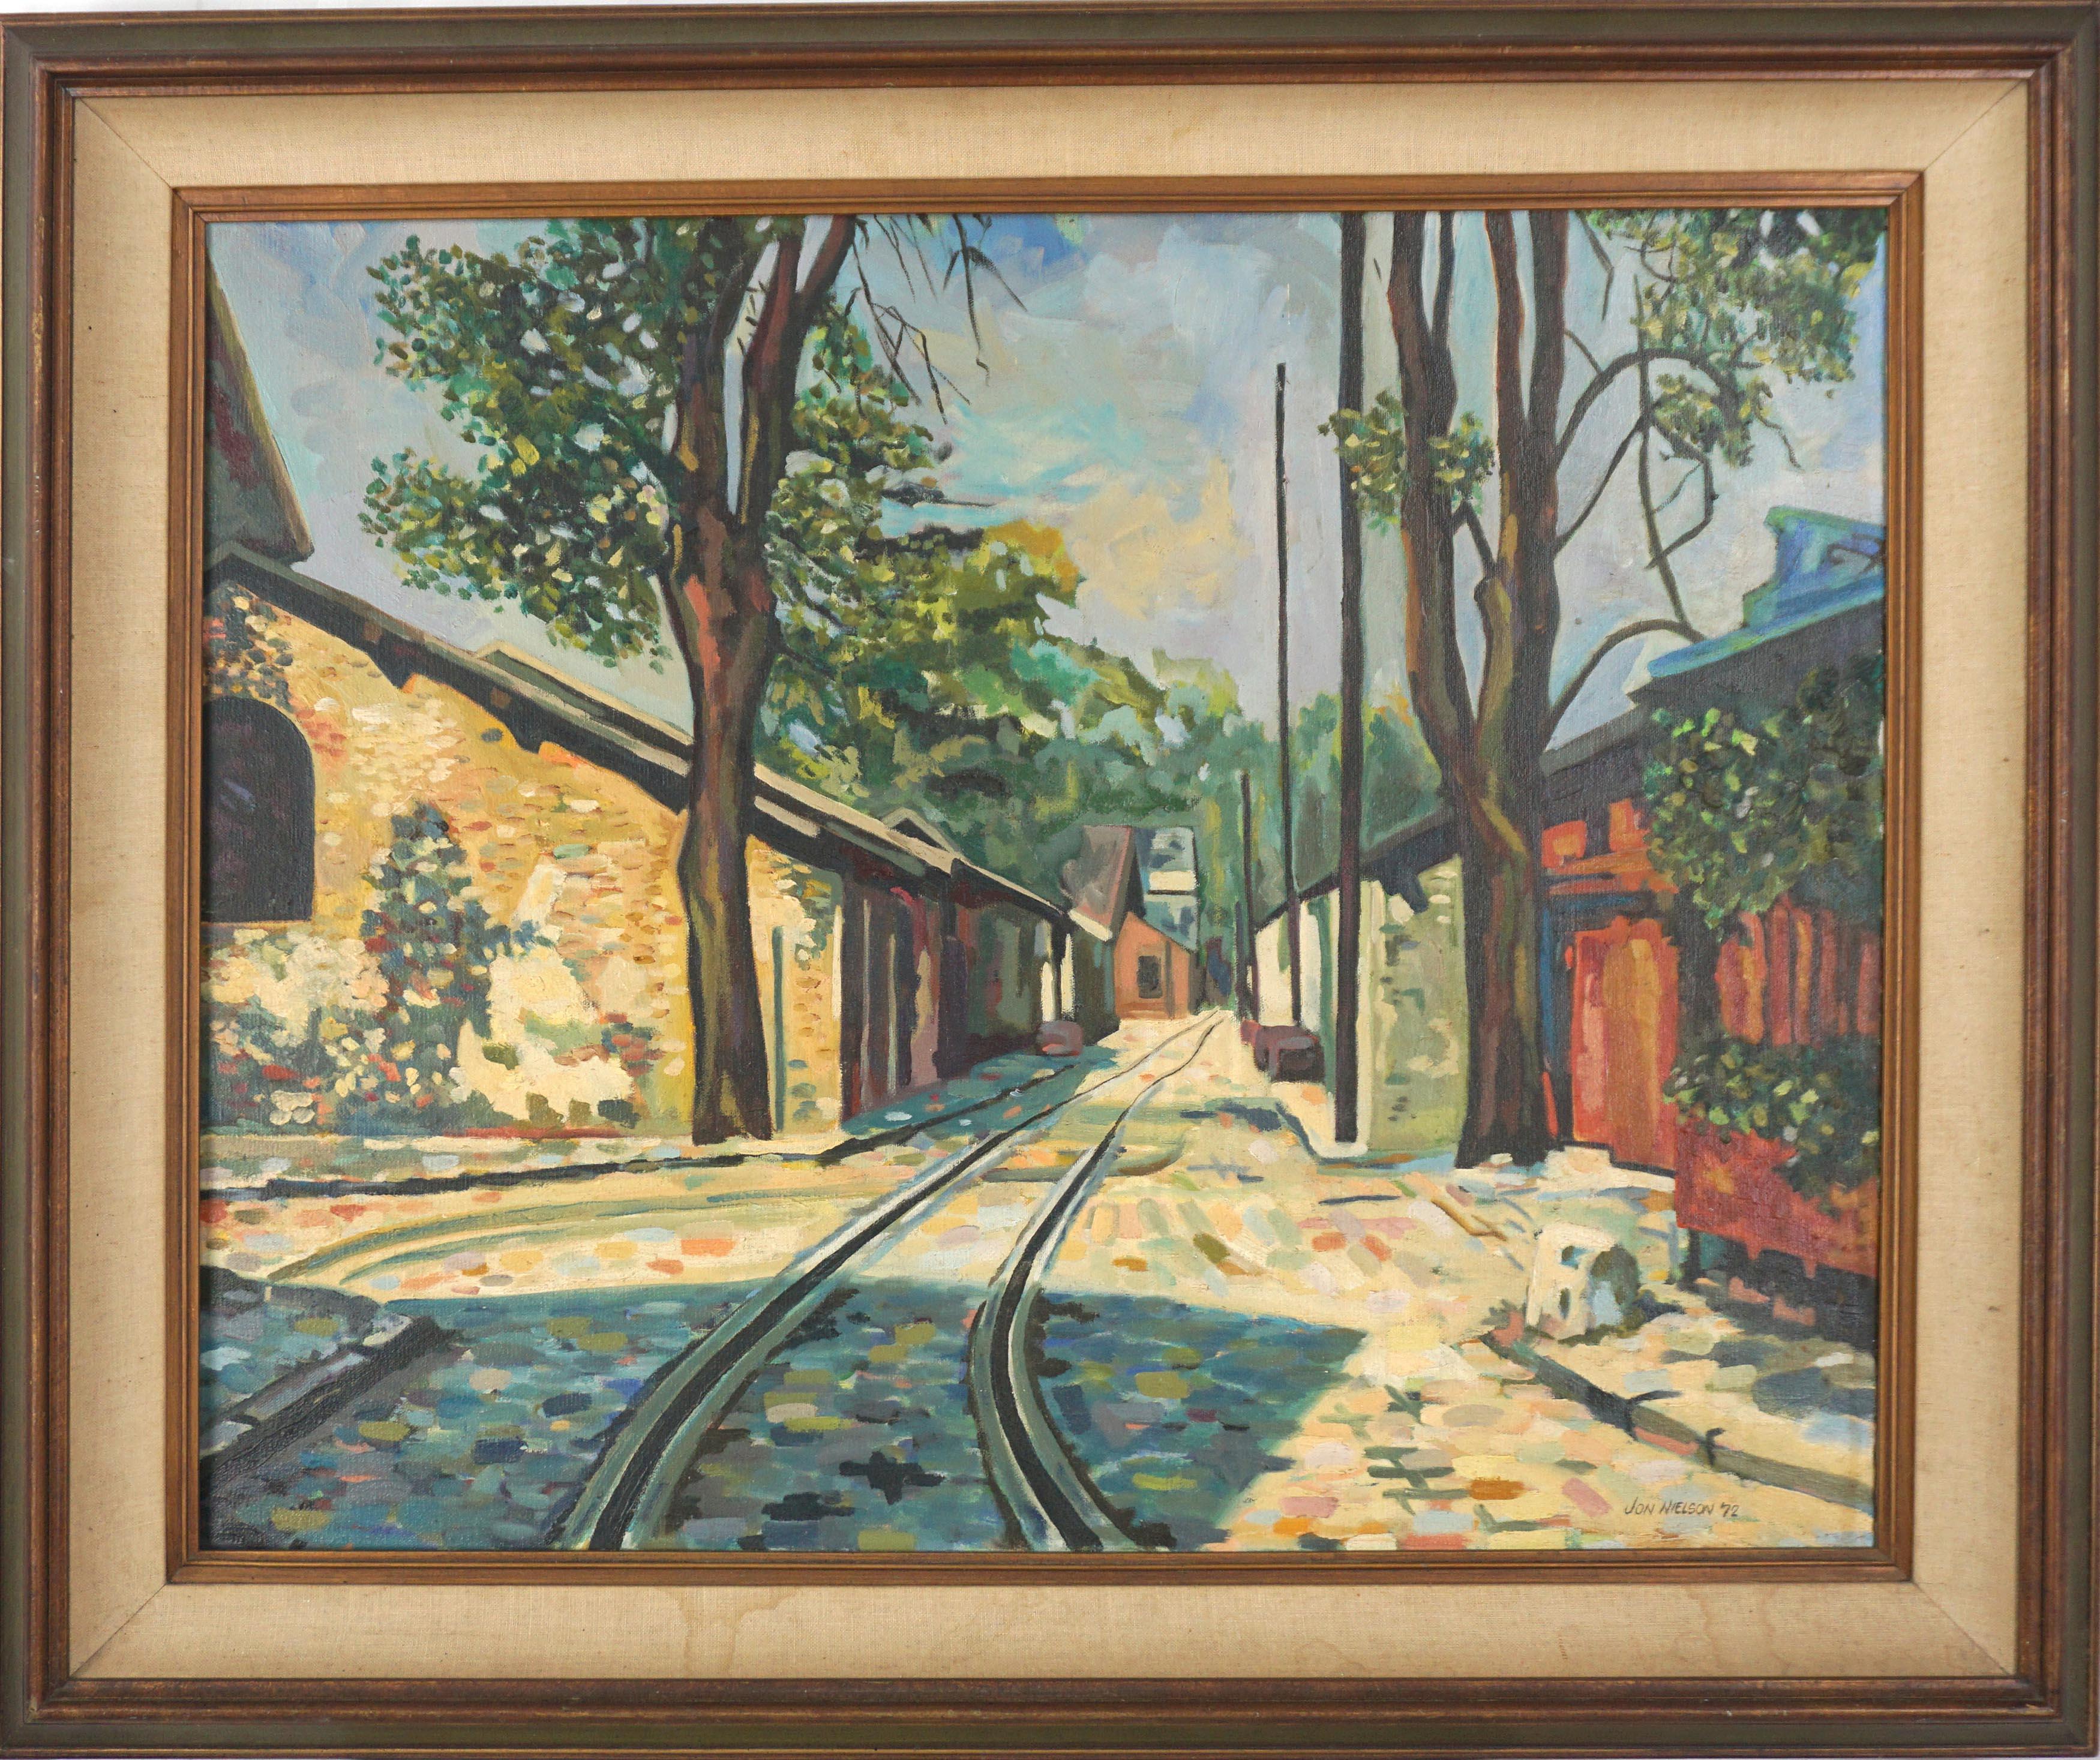 Jon Nielson Landscape Painting - Vintage Small Town Street with Railroad Tracks Landscape